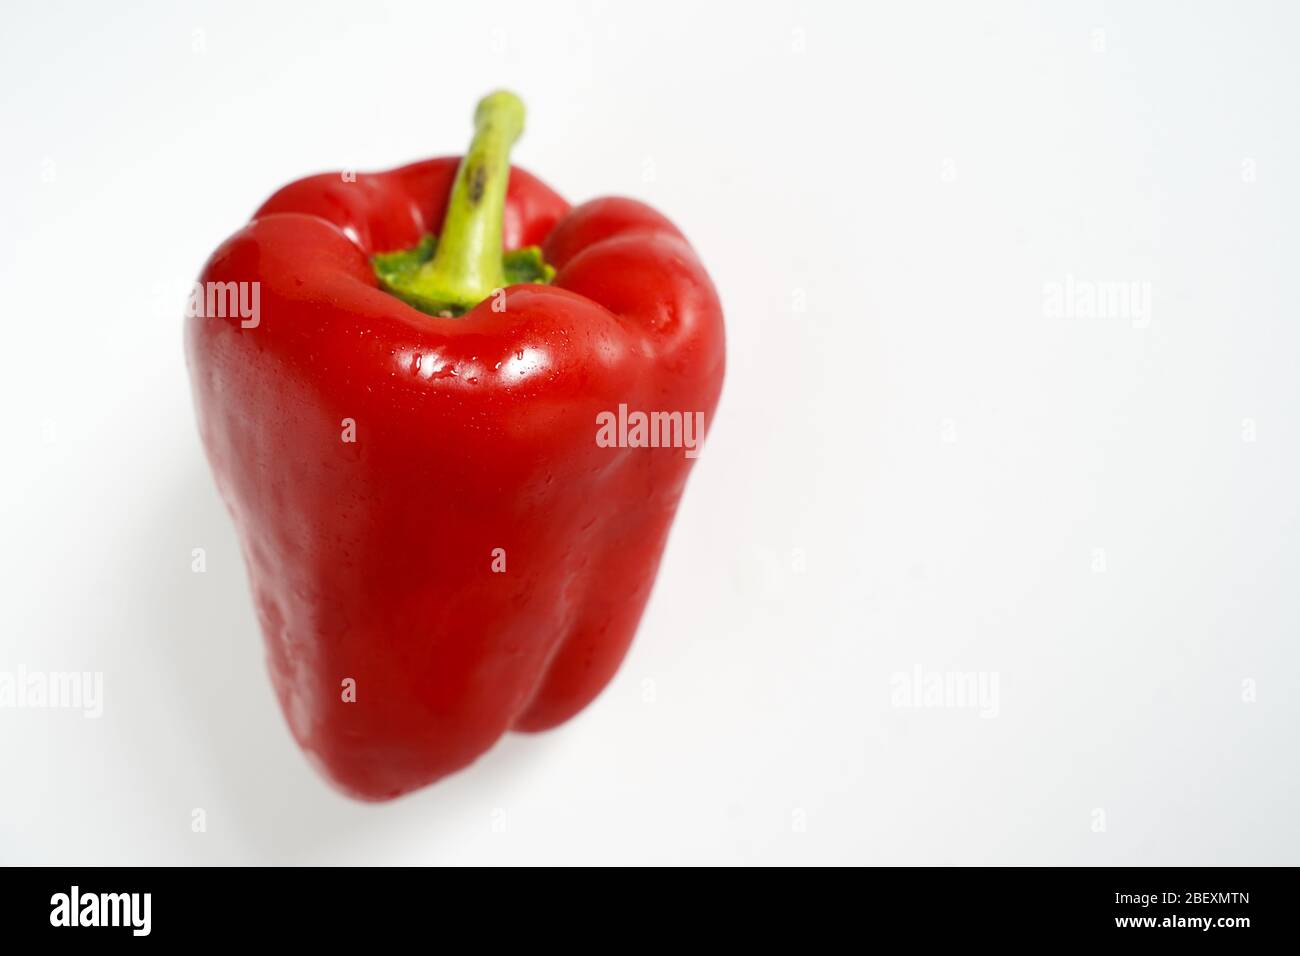 A whole red pepper on a plain white background Stock Photo